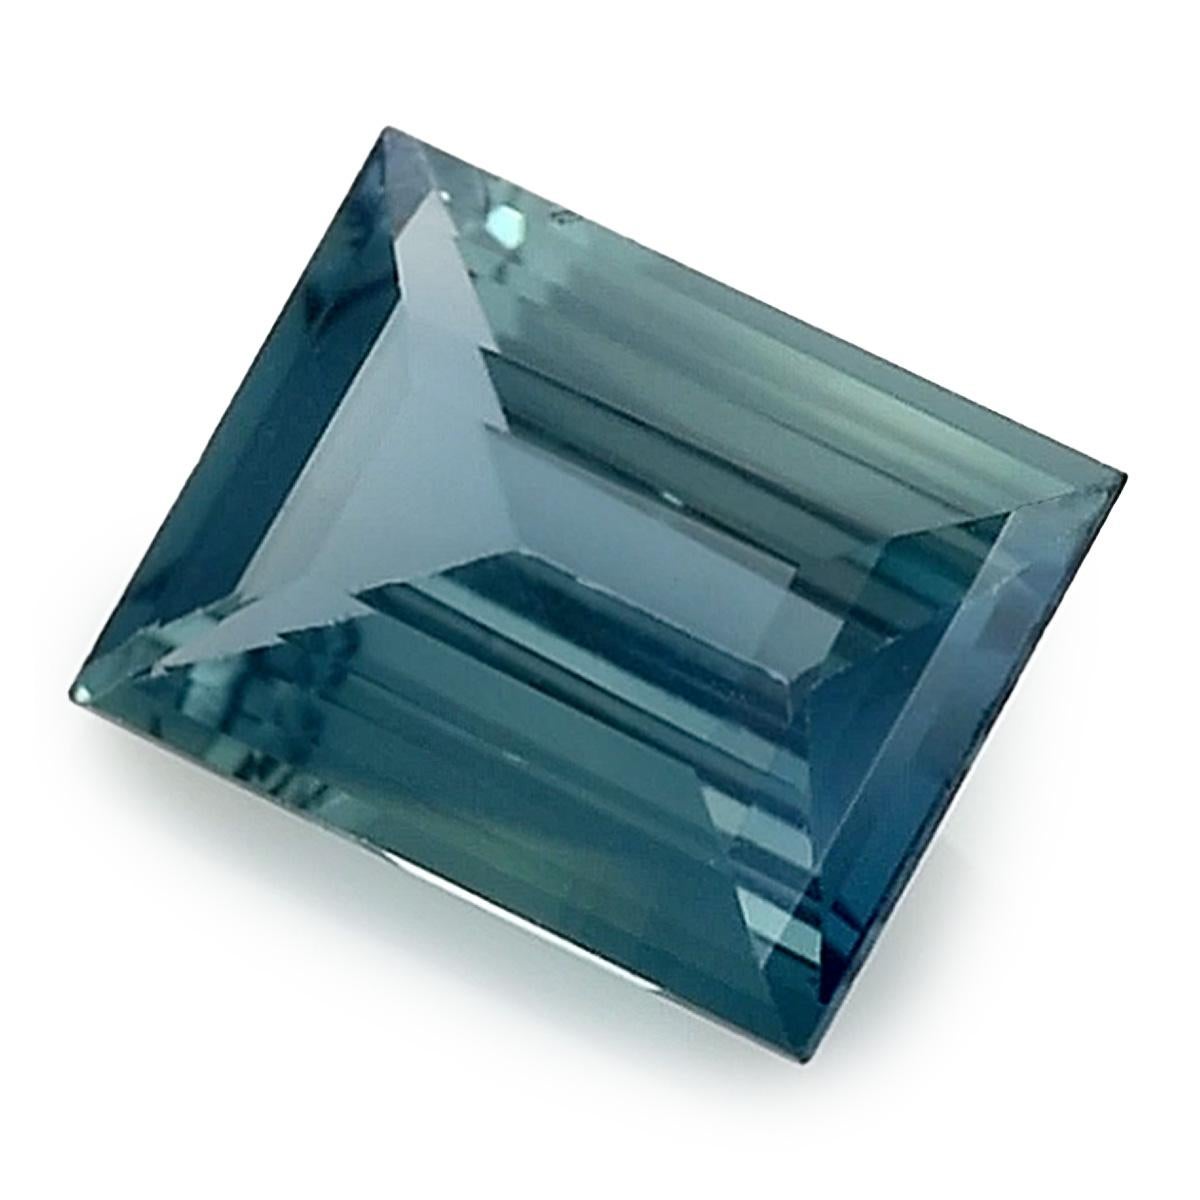 Introducing a Natural Green Sapphire of 1.10 carats, featuring a captivating Rectangle shape with precise measurements of 7.08 x 5.25 x 2.81 mm. The gem's brilliance is accentuated by the Brilliant/Step cut, revealing a beautiful Green Blue color.